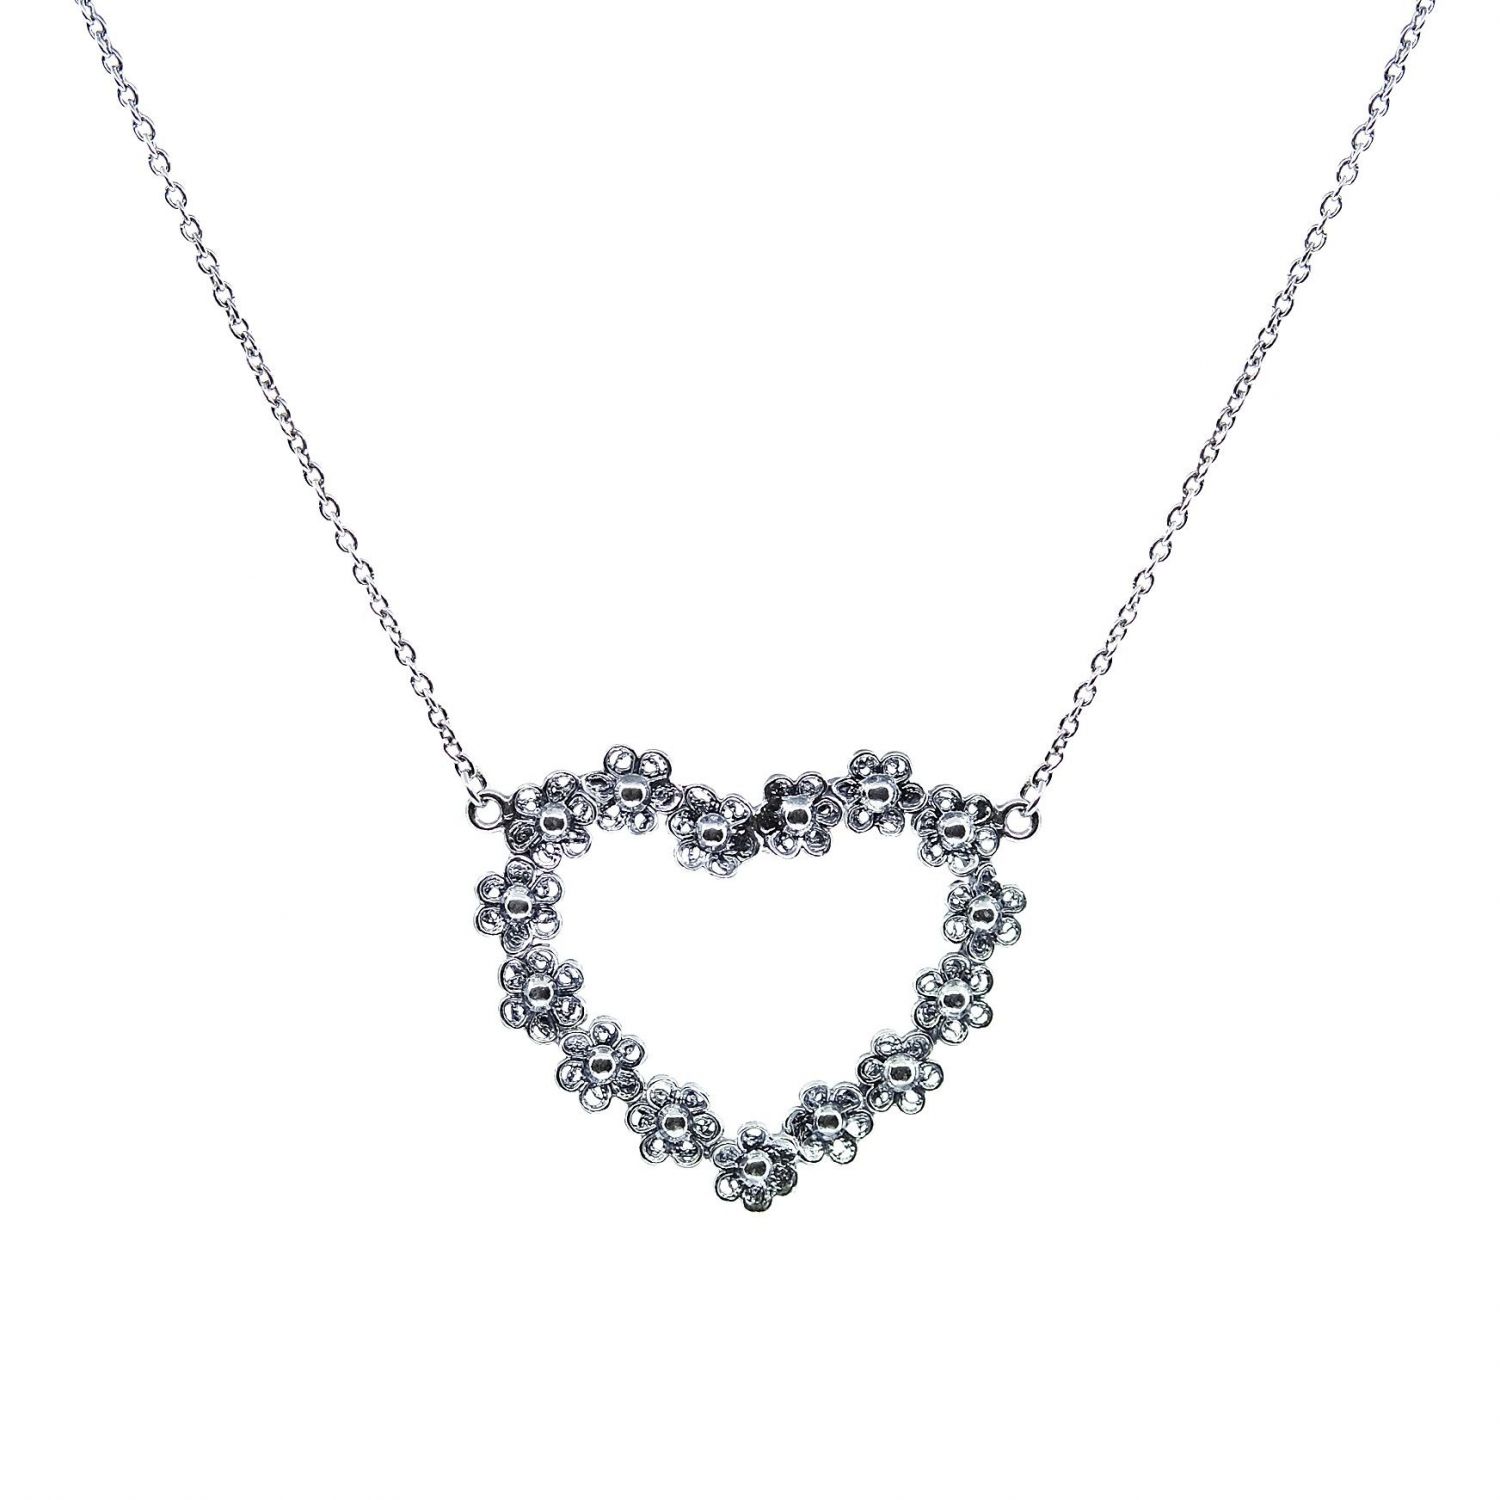 Necklace Heart of Flowers in Silver 